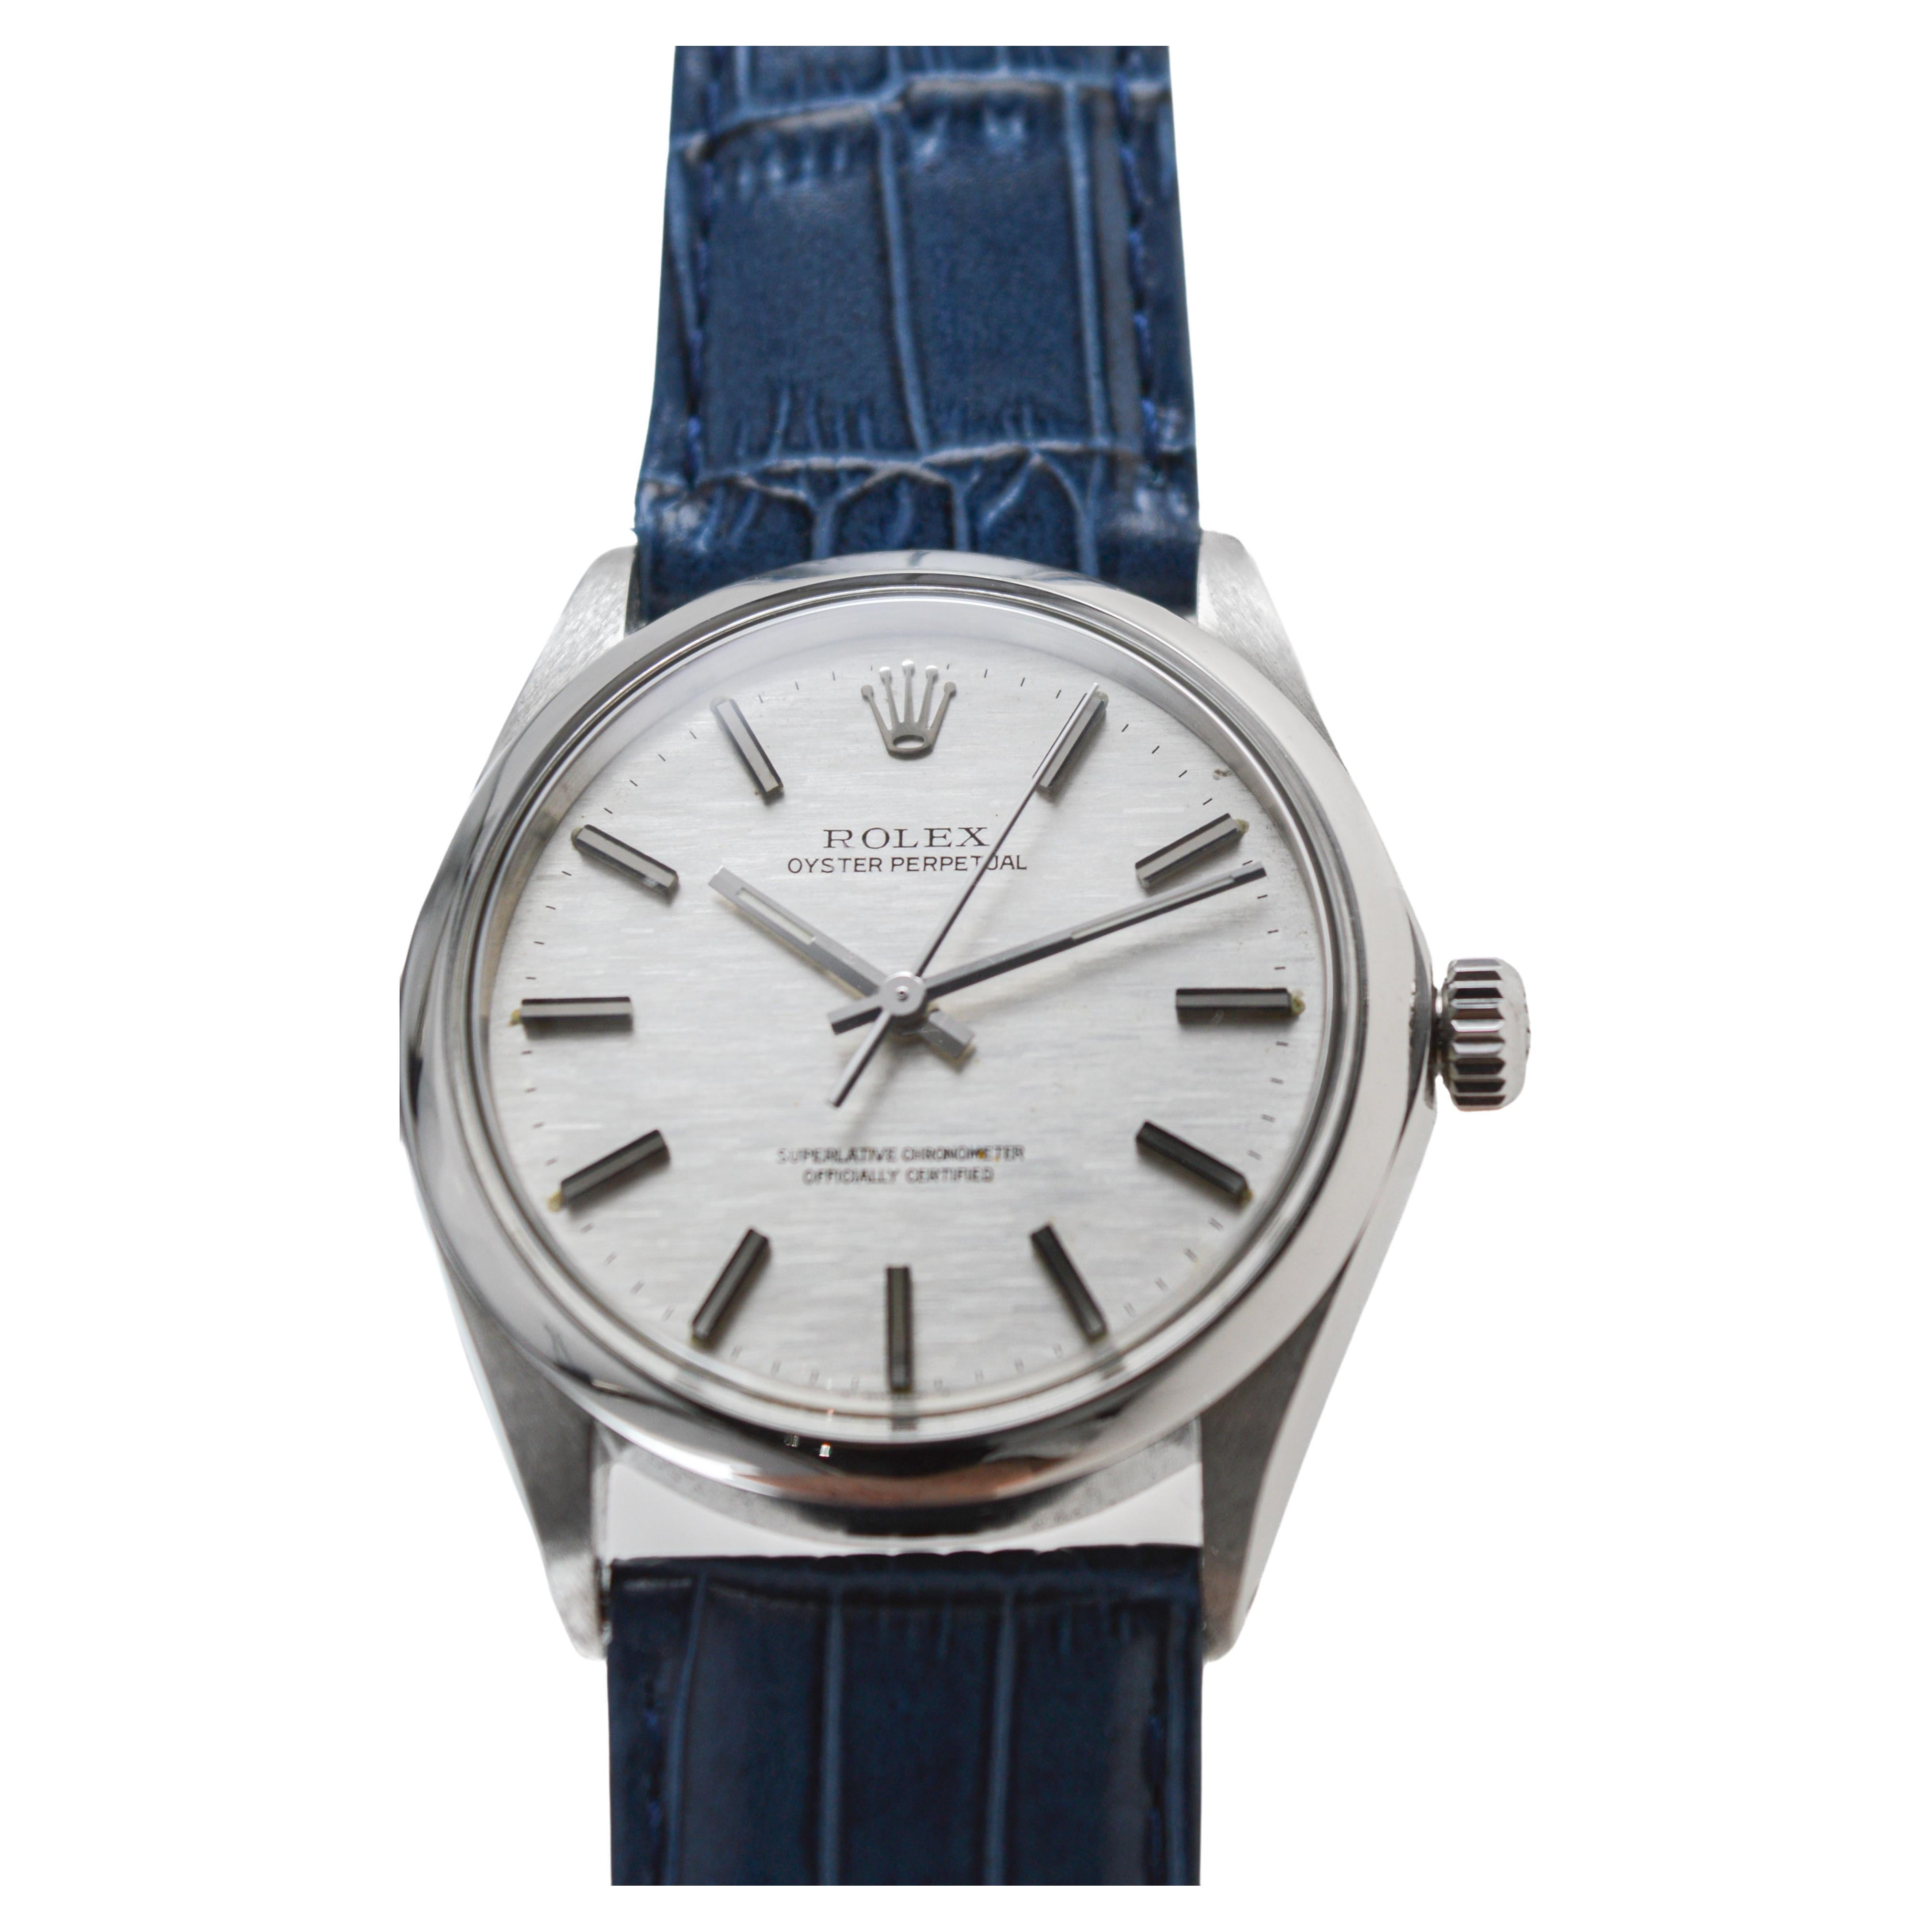 Women's or Men's Rolex Steel Oyster Perpetual with Factory Original Mosaic Dial circa 1973 / 74 For Sale